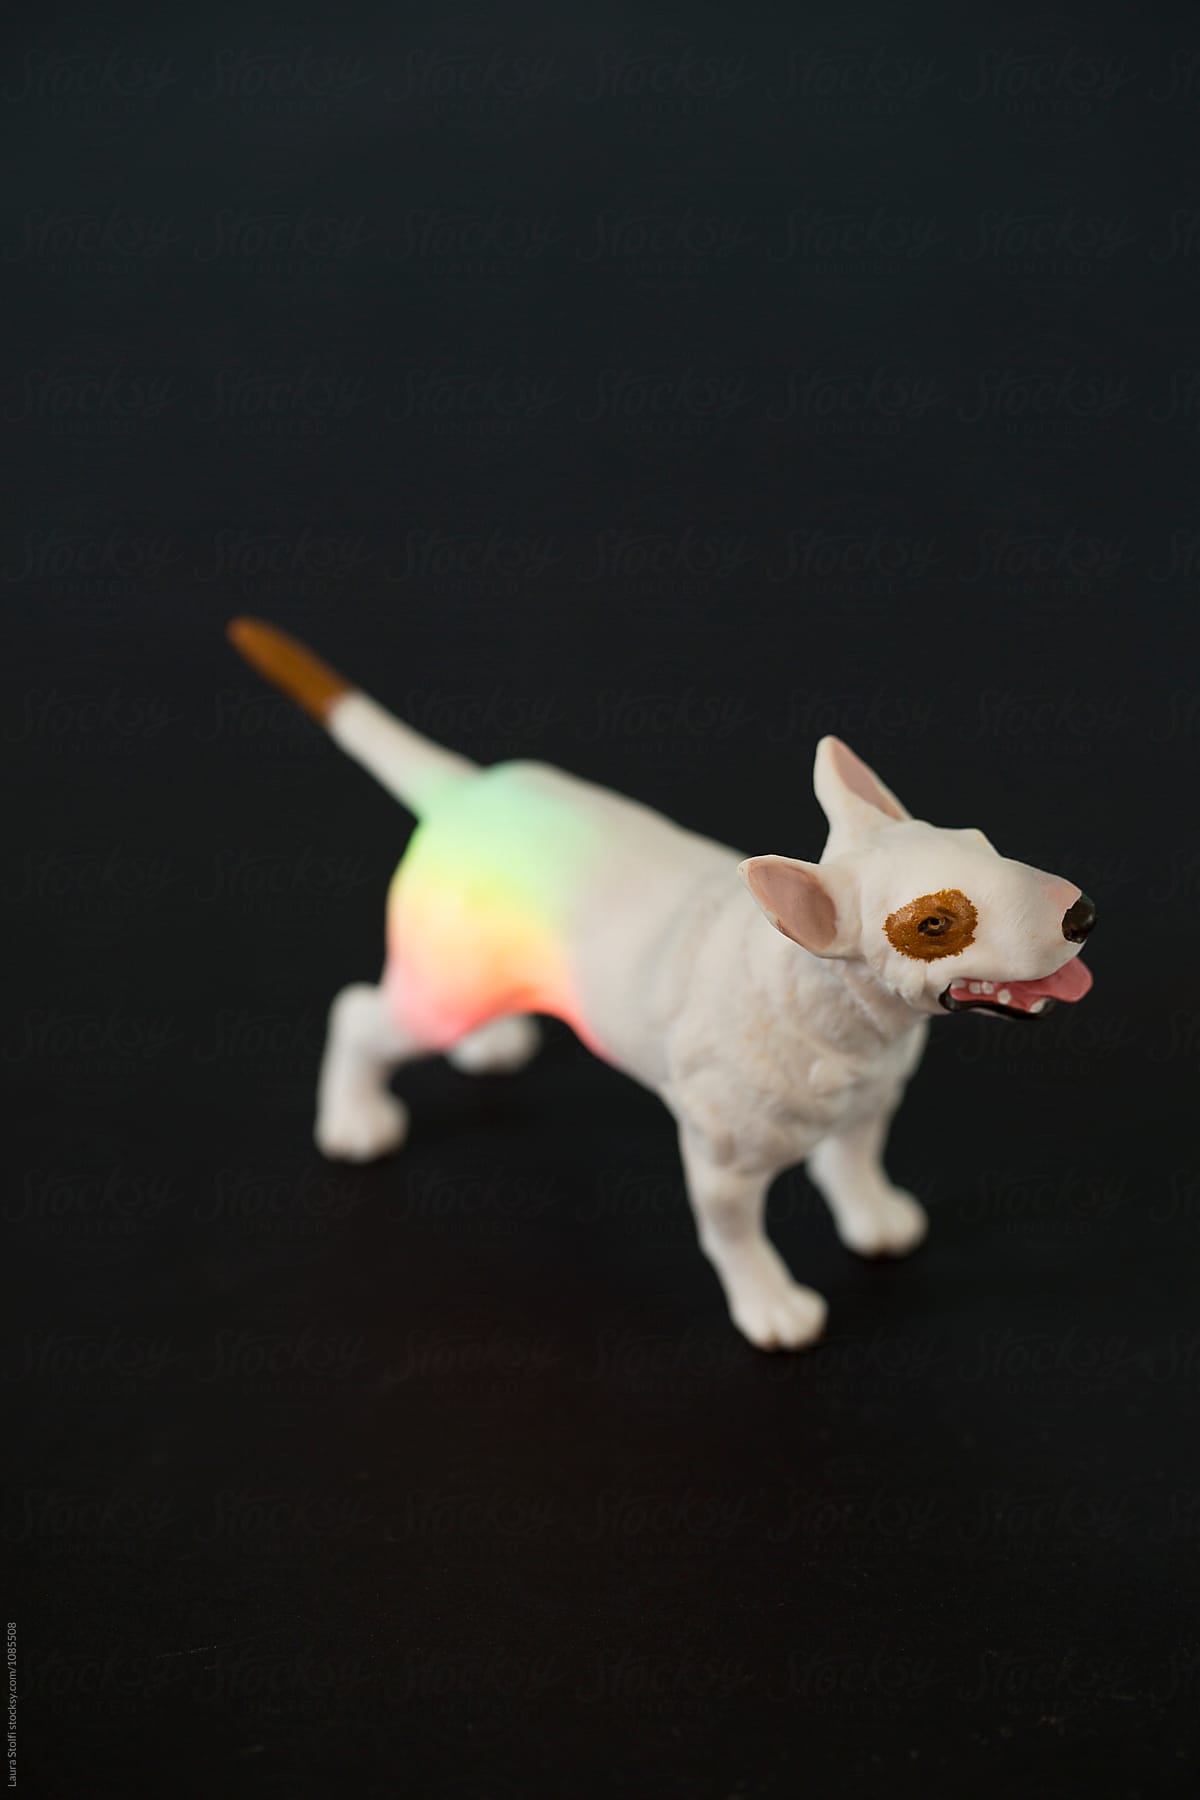 Terrier toy with rainbow light on it on black